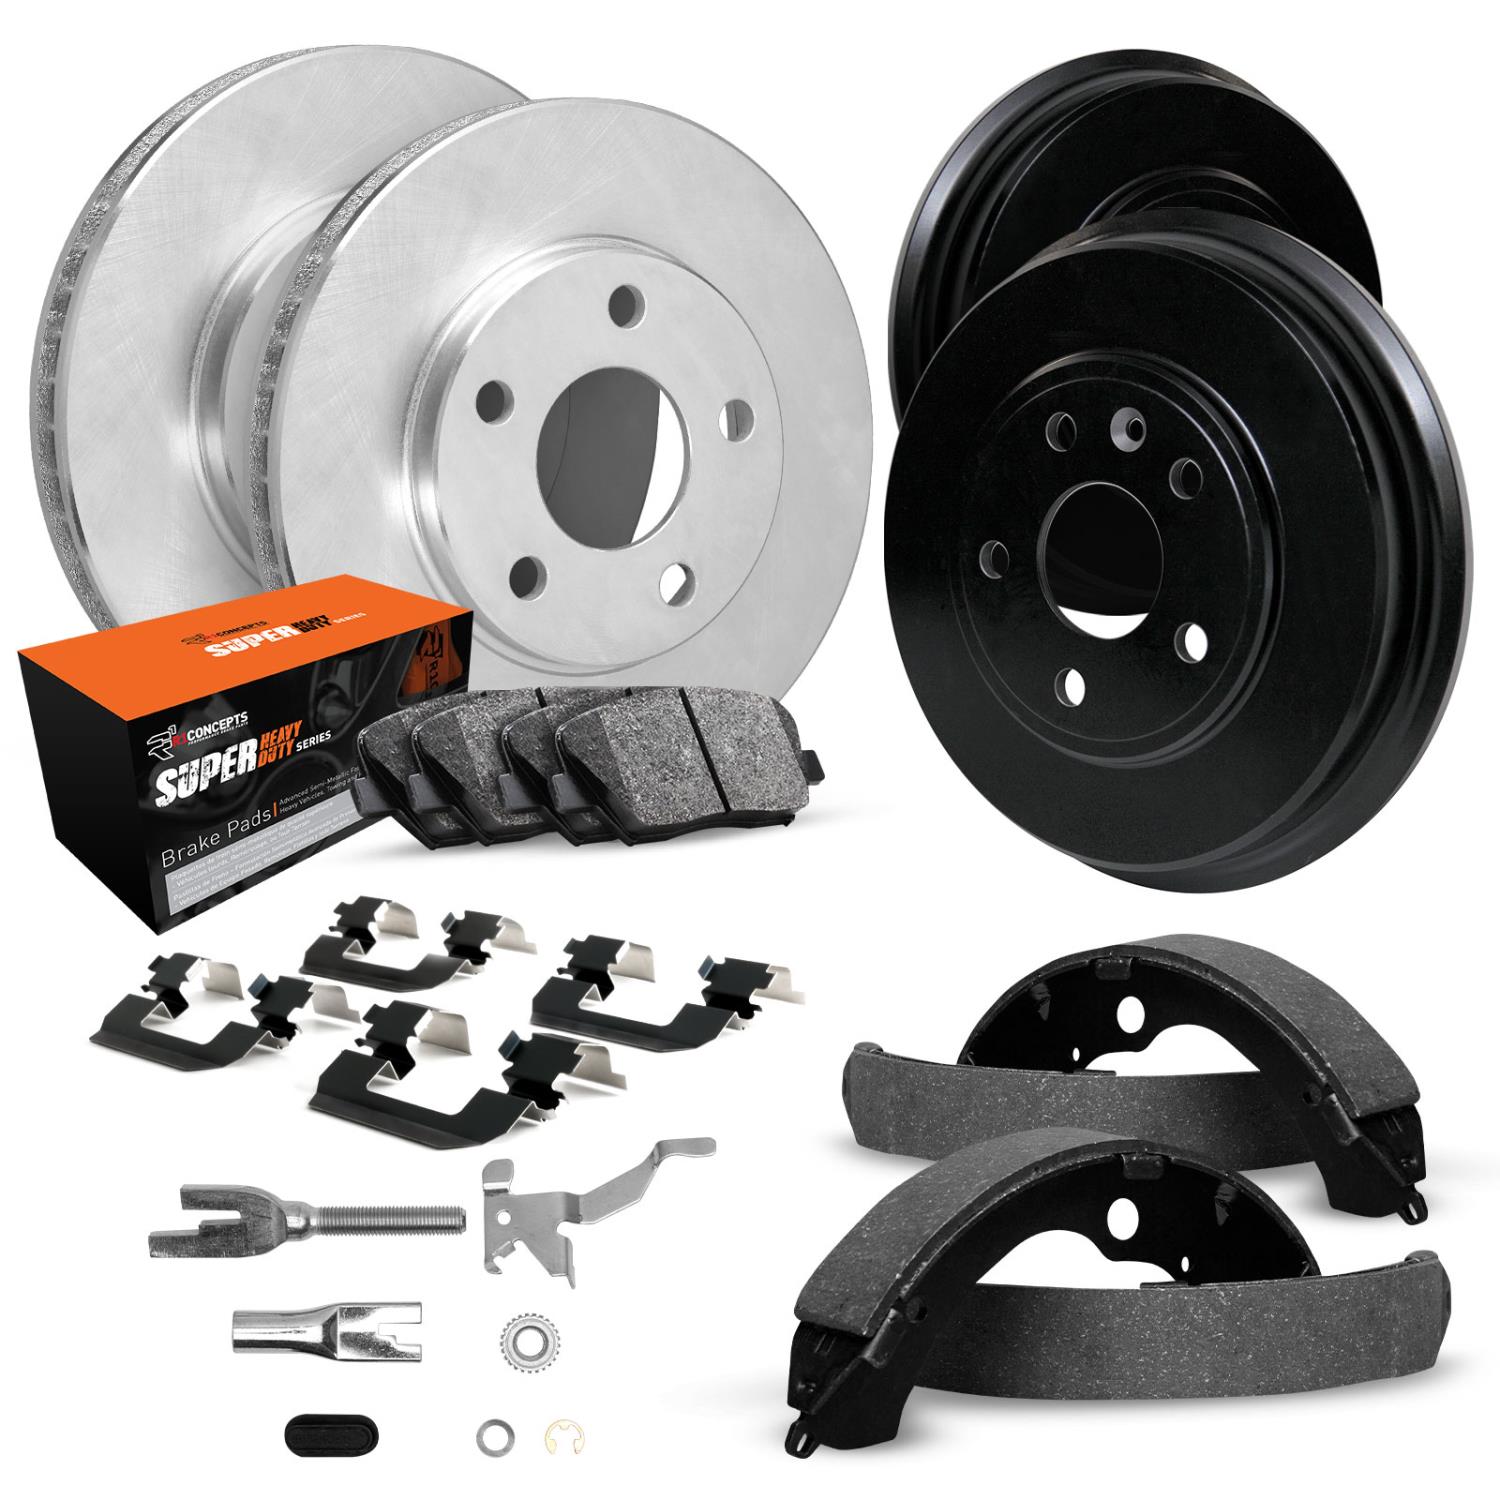 E-Line Blank Brake Rotor & Drum Set w/Super-Duty Pads, Shoes, Hardware, & Adjusters, 1986-1992 Ford/Lincoln/Mercury/Mazda